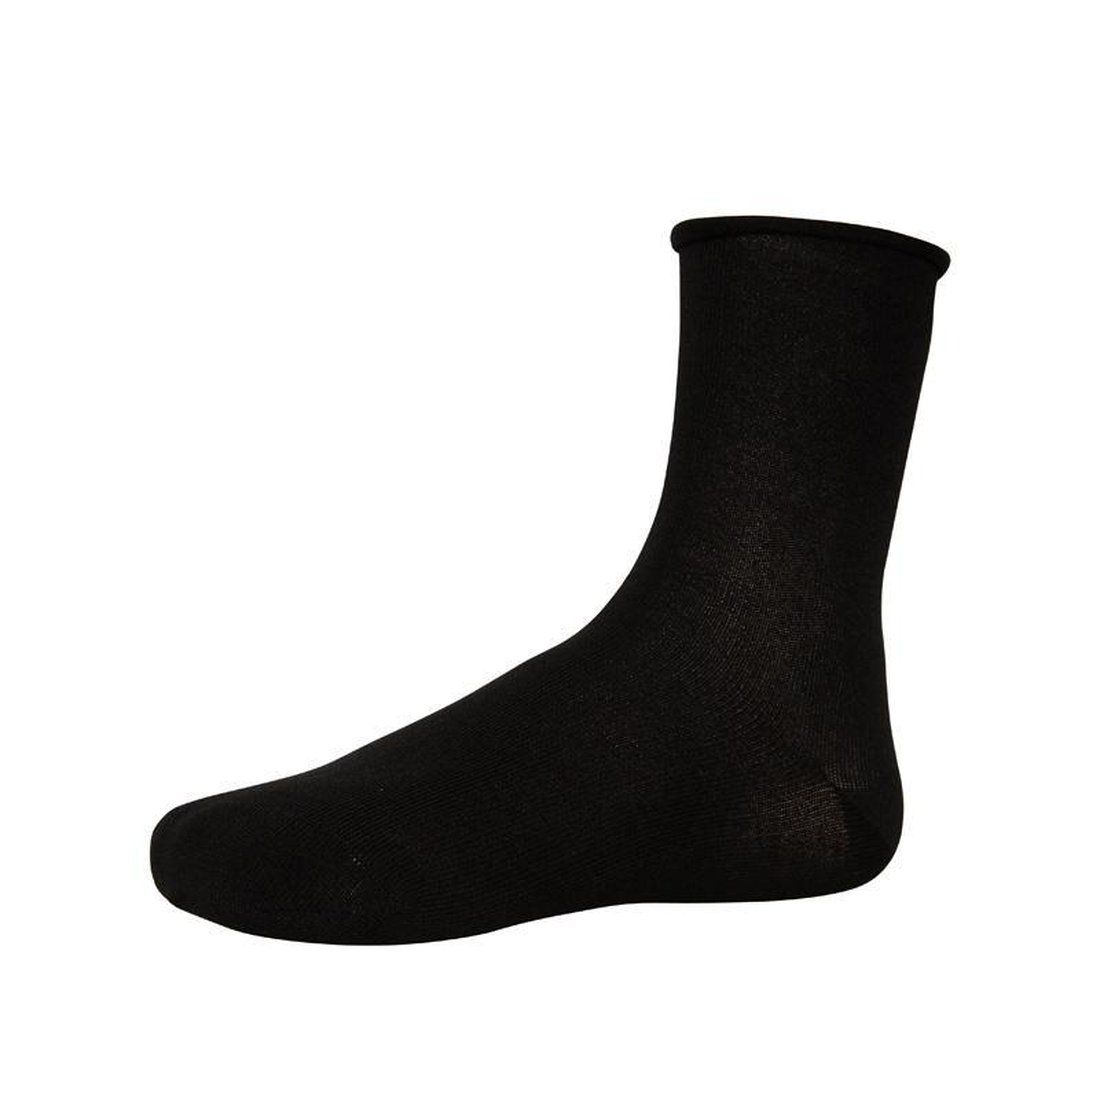 Ysabel Mora 12347 Bamb̼ Sin Puno Sock - No cuff quarter high bamboo socks with shaped heel and flat toe seam, available in black, navy and grey.